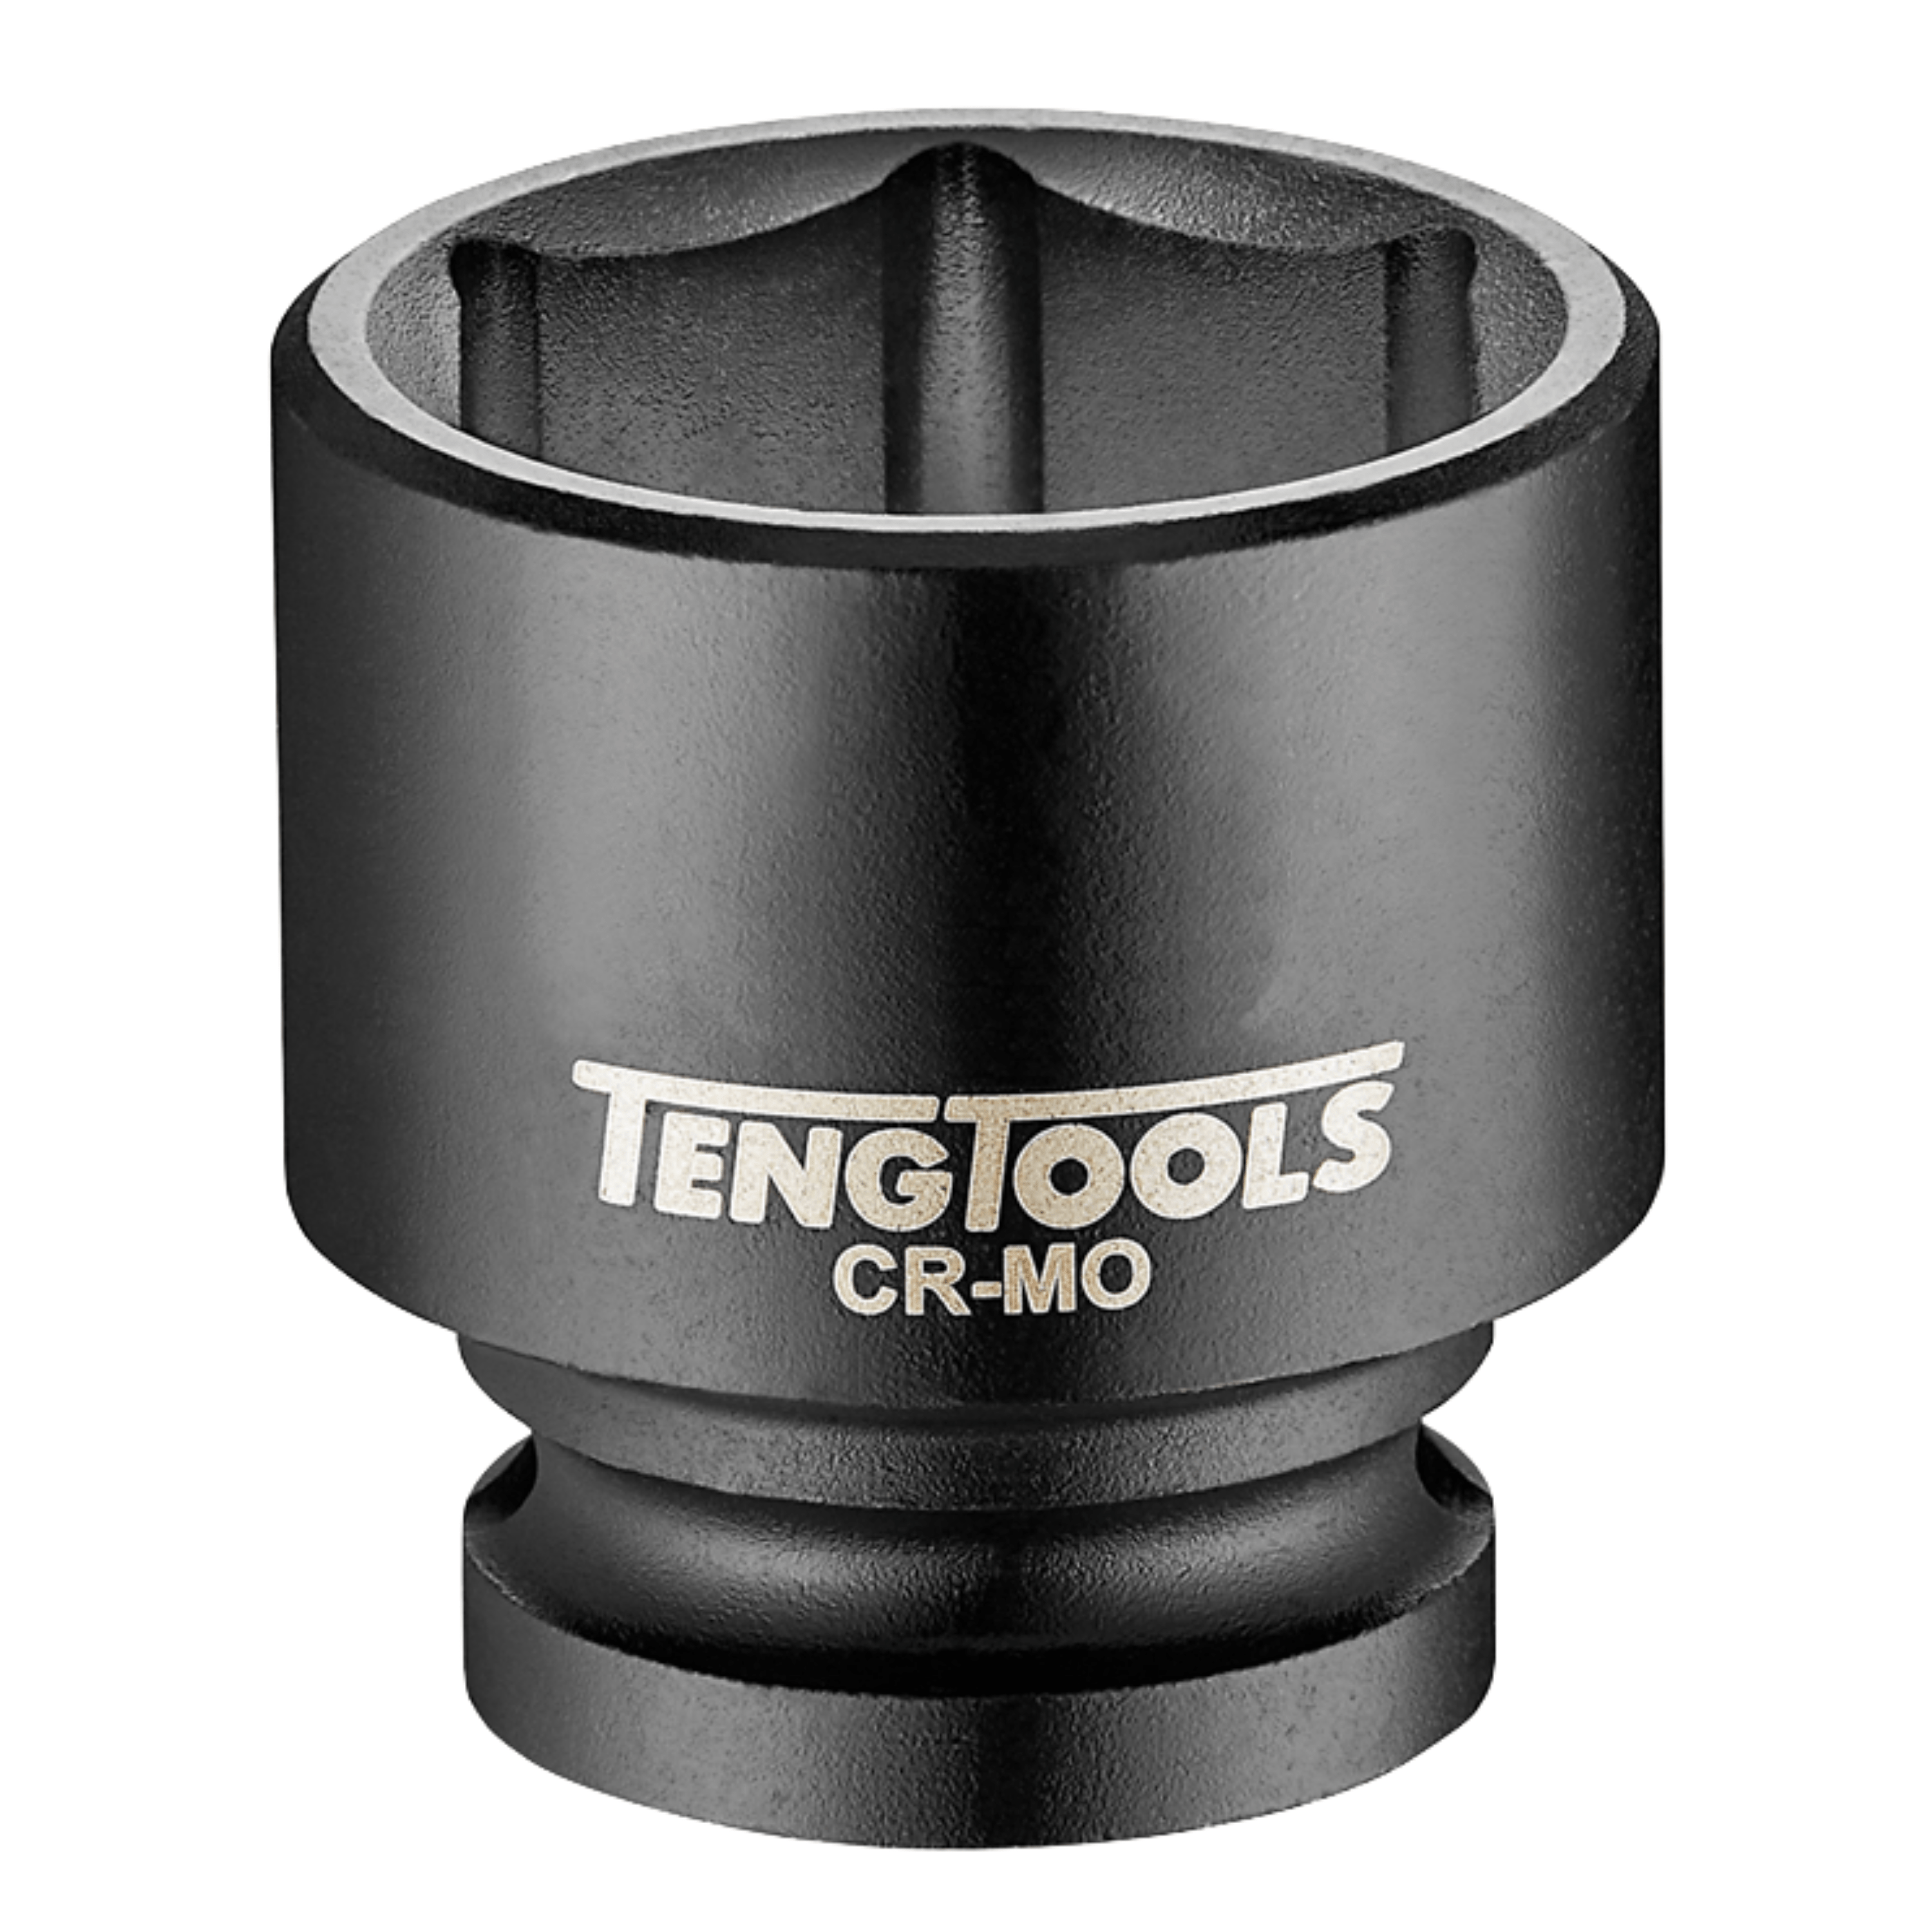 Teng Tools 1-1/2 Inch Drive 6 Point Metric Shallow Chrome Molybdenum Impact Sockets - 130mm